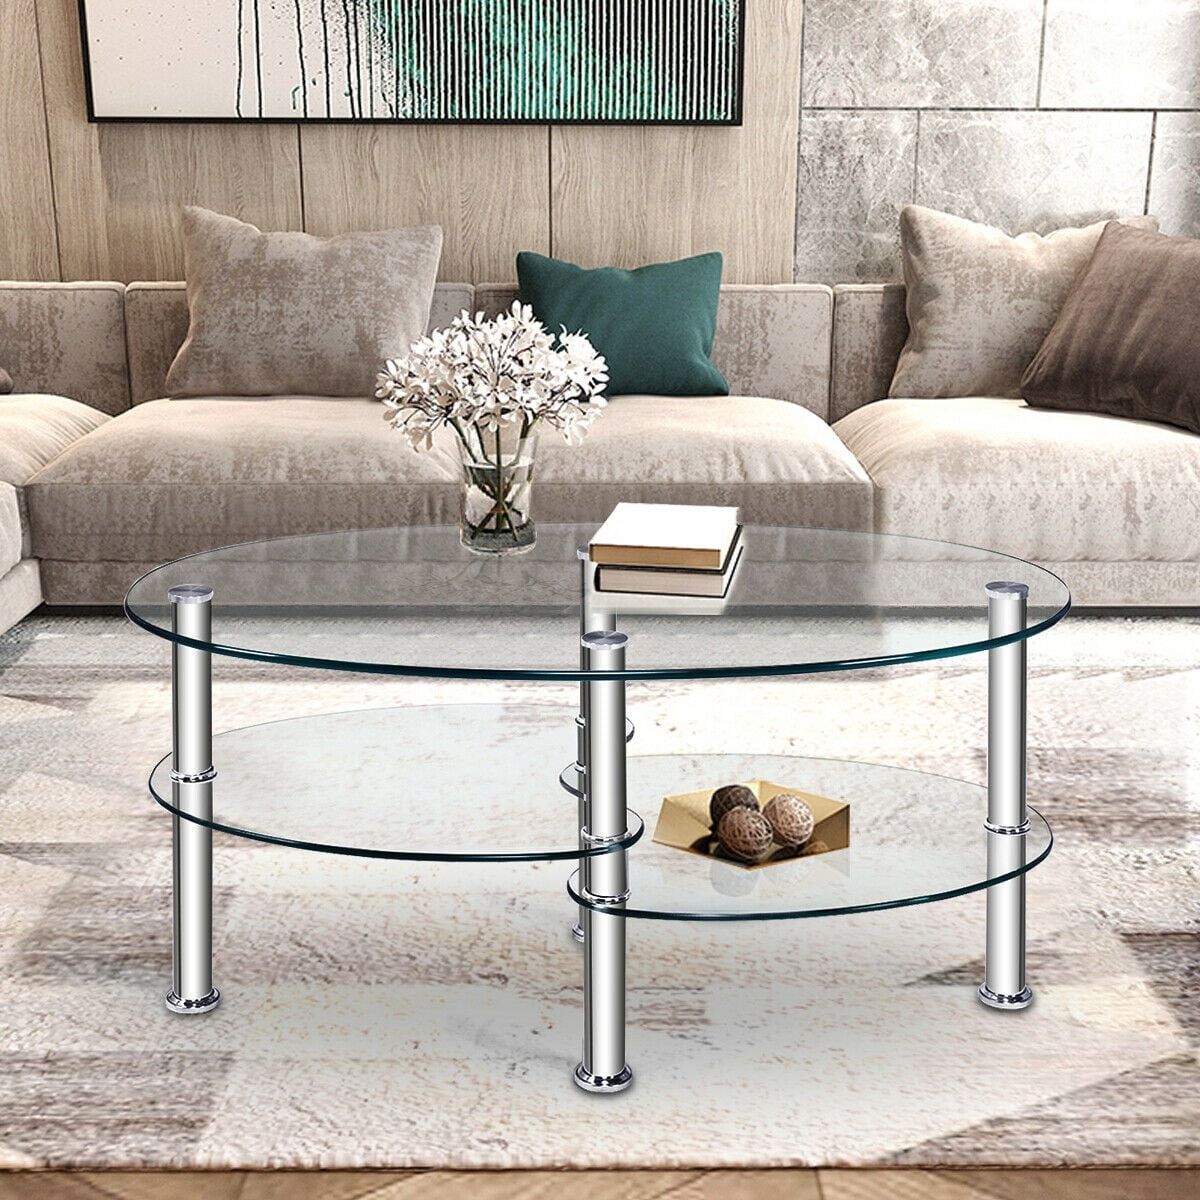 Costway Tempered Glass Oval Side Coffee Table Shelf Chrome Base Living Regarding Oval Glass Coffee Tables (Gallery 17 of 20)